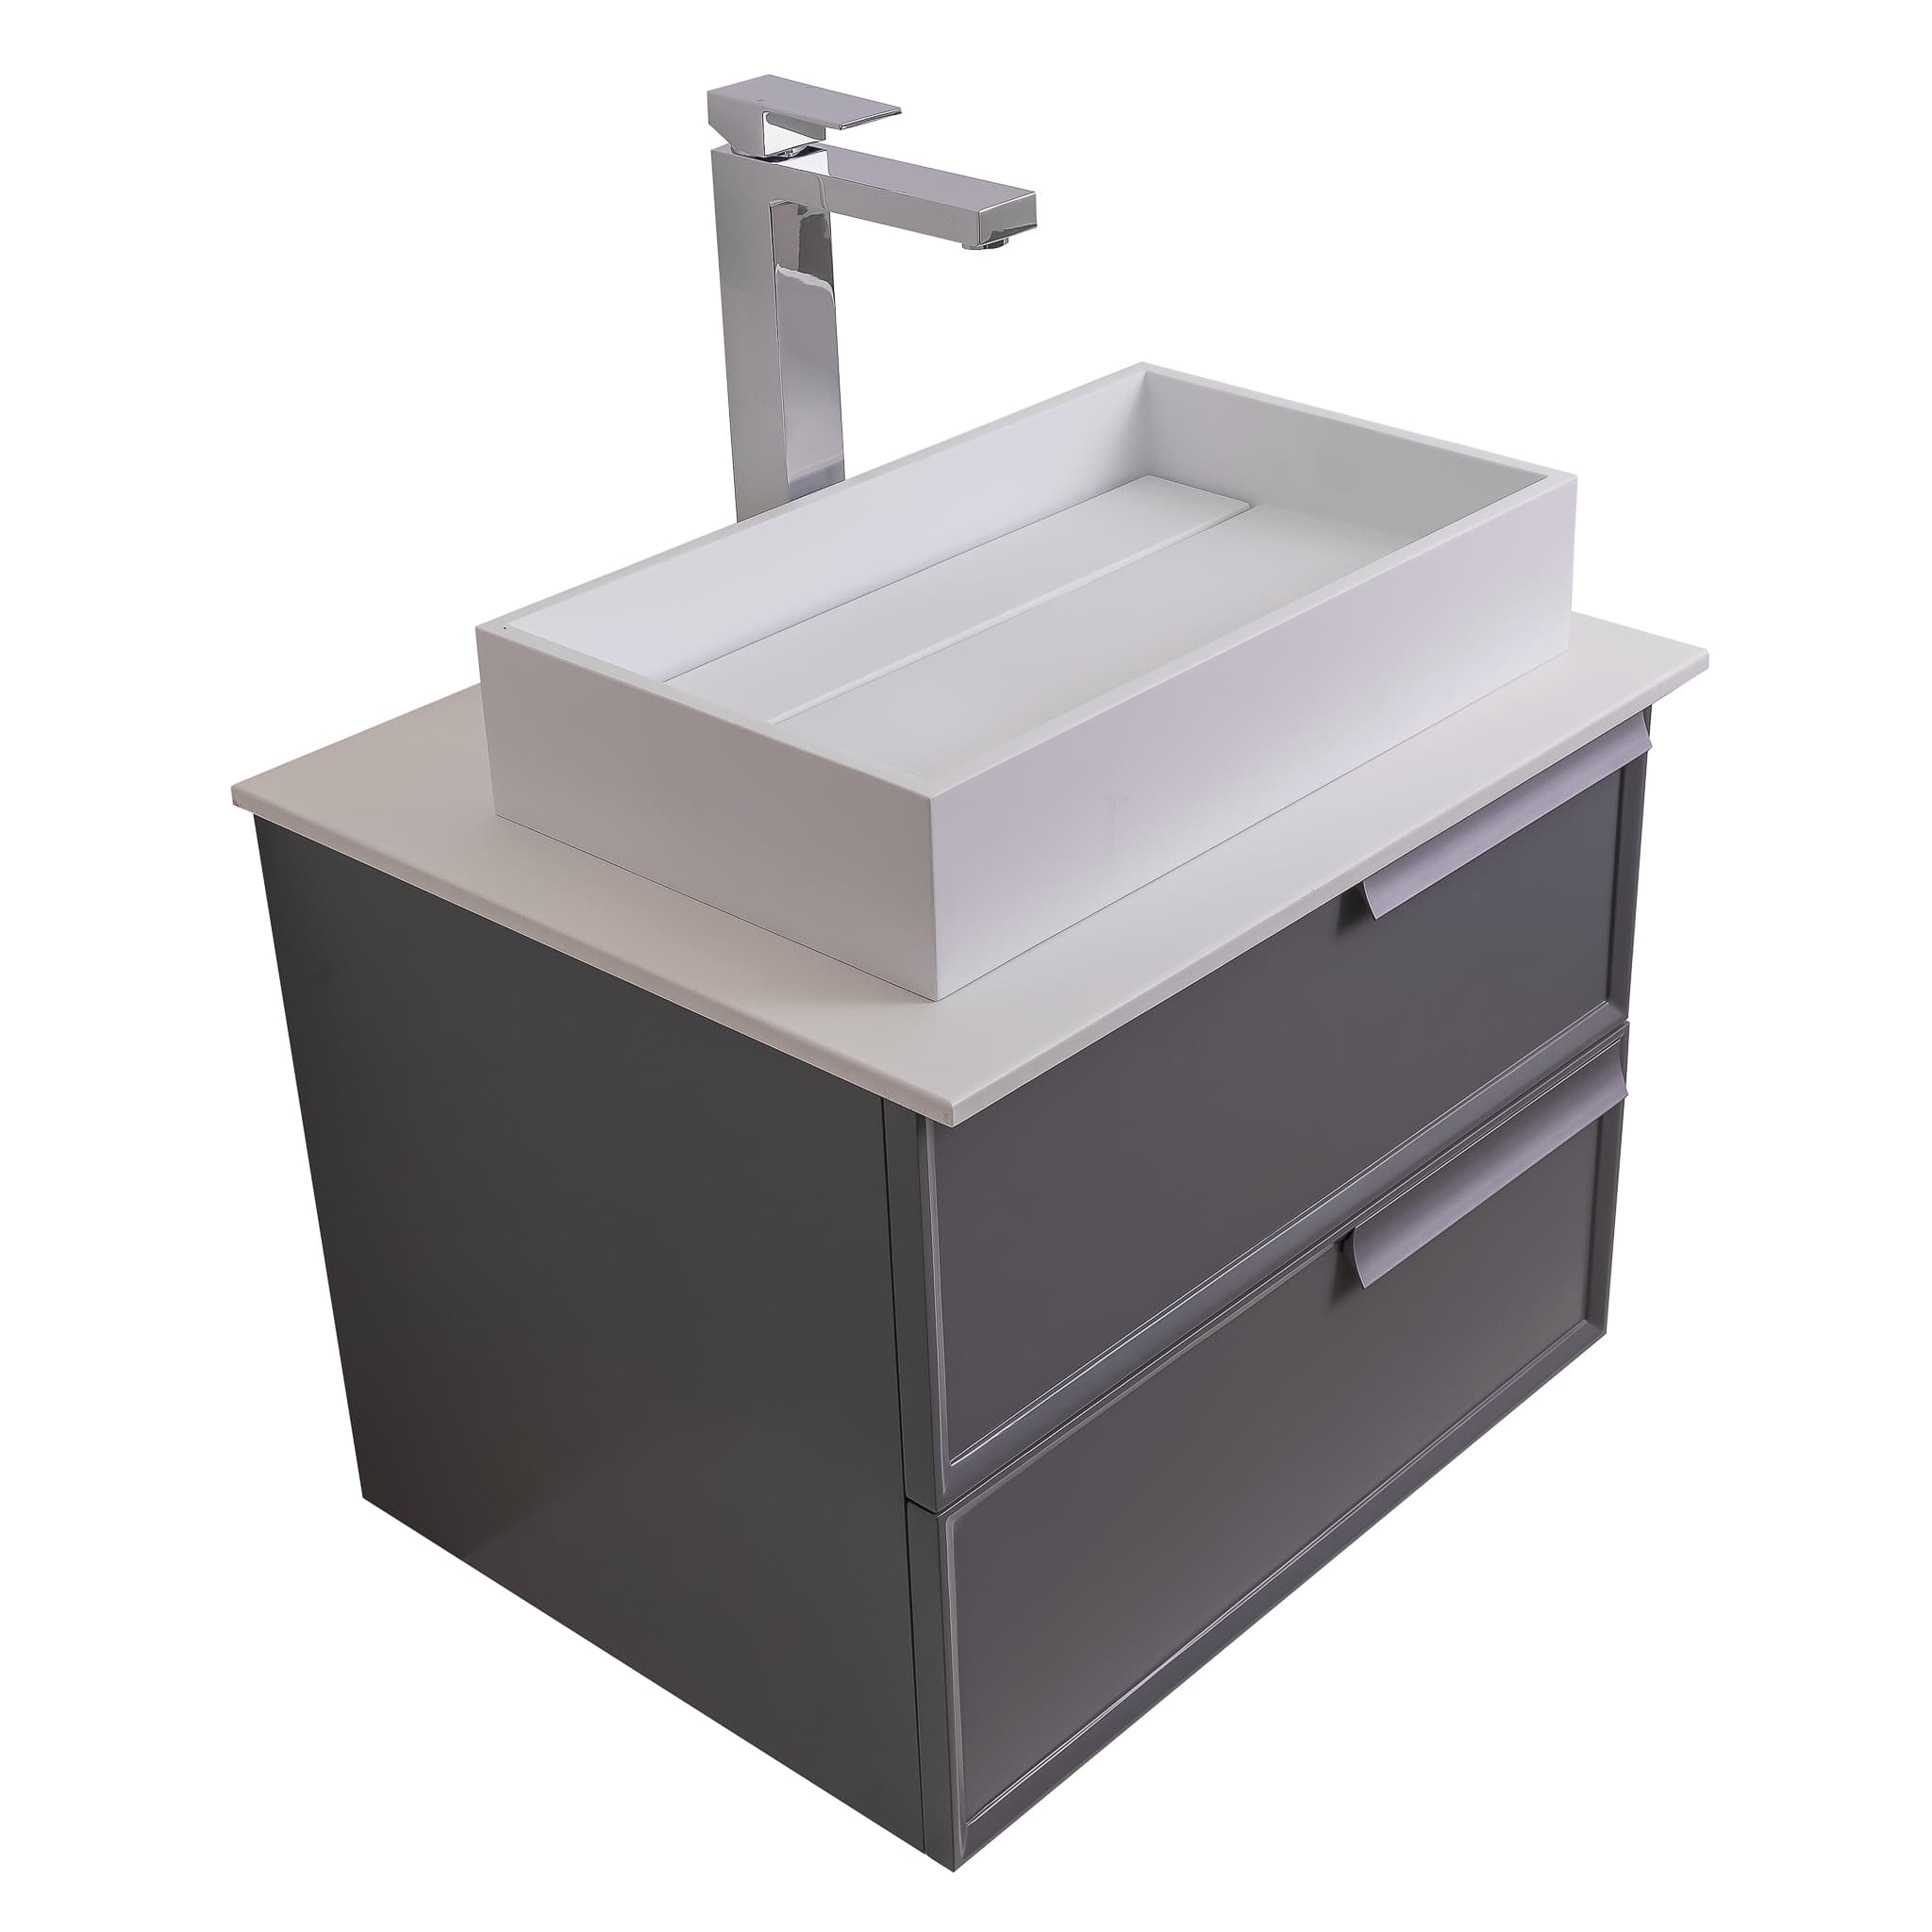 Garda 23.5 Matte Grey Cabinet, Solid Surface Flat White Counter and Infinity Square Solid Surface White Basin 1329, Wall Mounted Modern Vanity Set